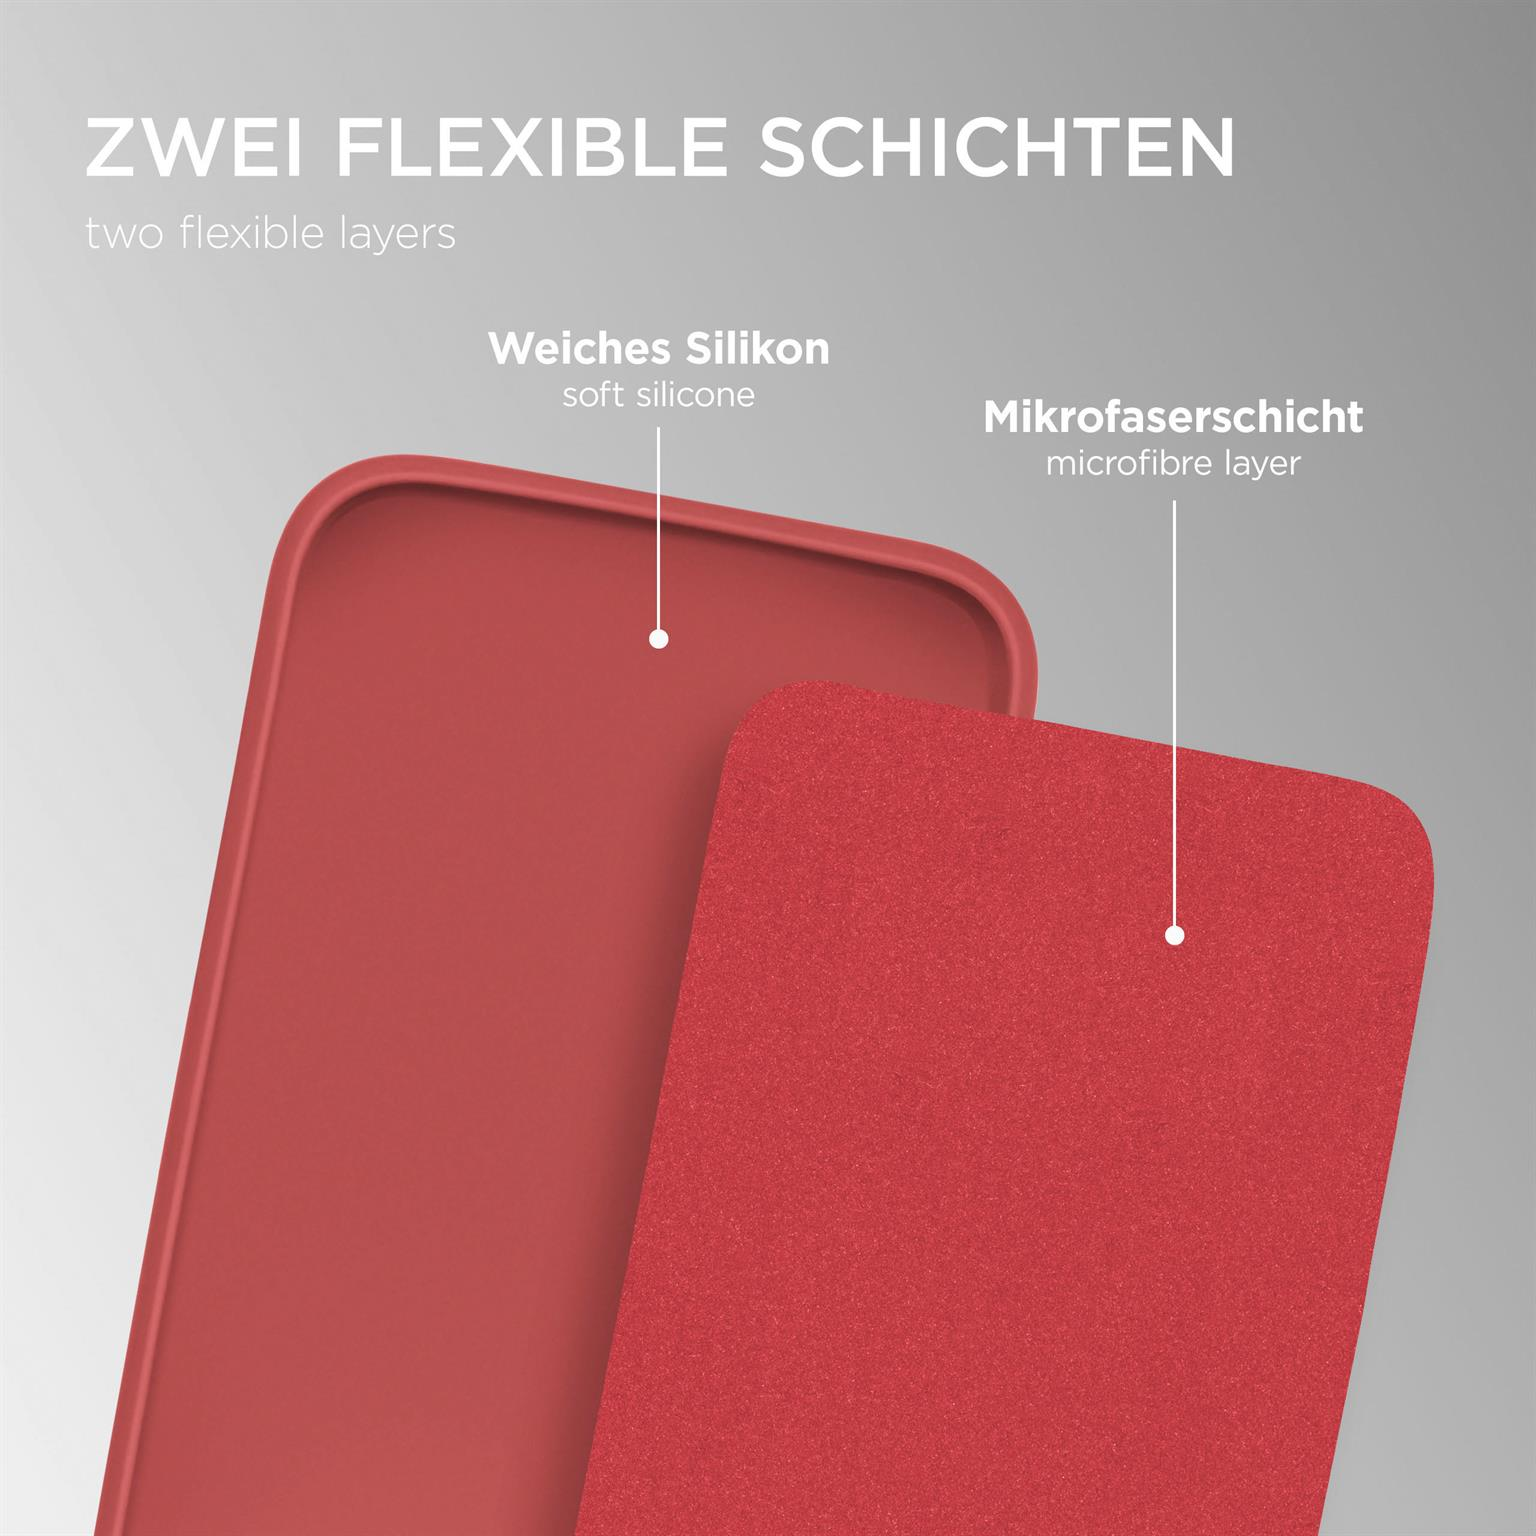 Apple, Sonnenuntergangsrot Case, 14 ONEFLOW Backcover, iPhone Soft Pro Max,